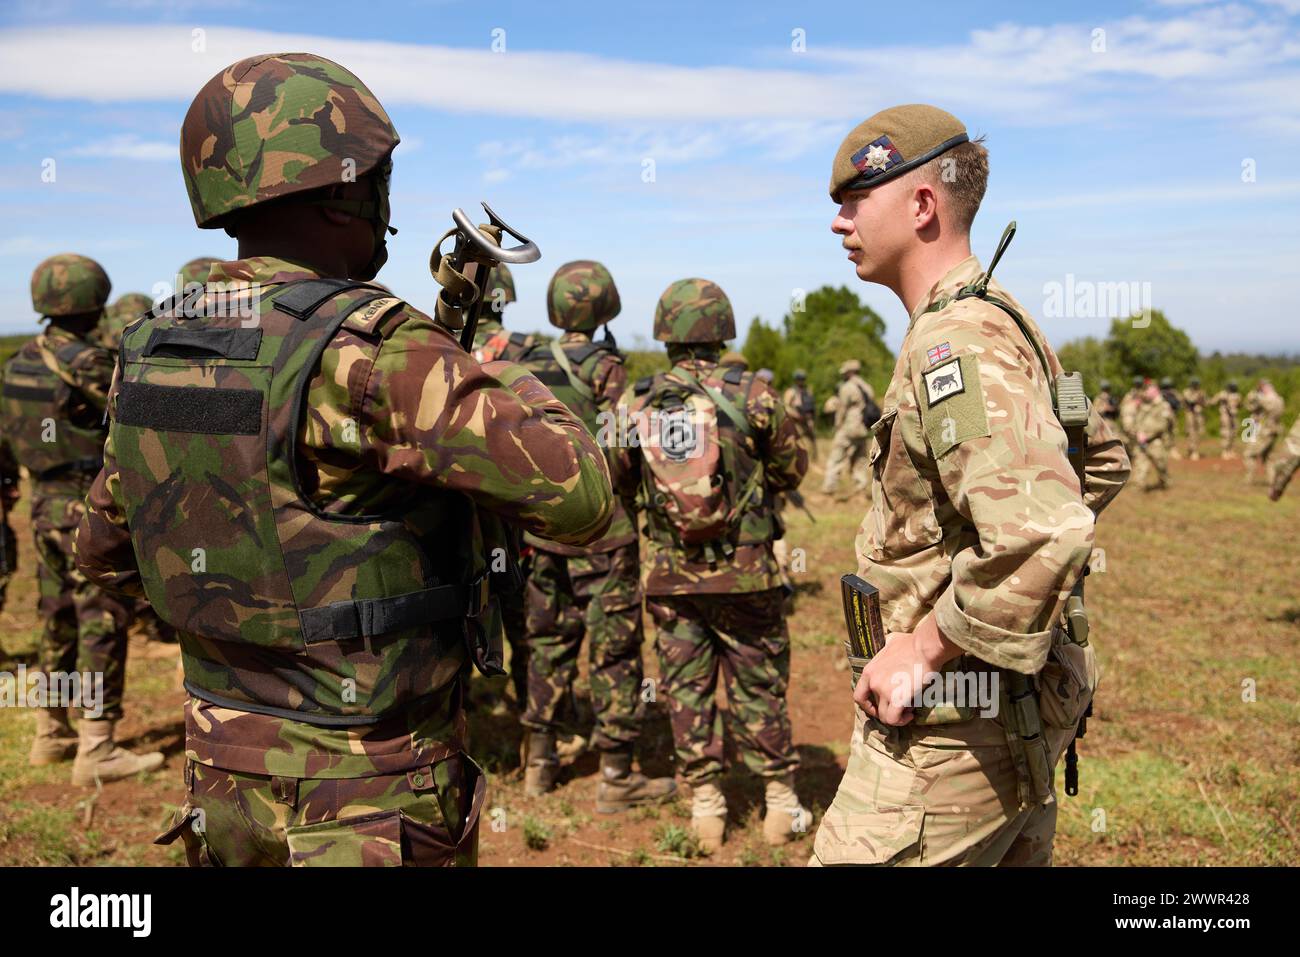 Military members from the Kenya Defence Forces and 1st Battalion Irish Guards, part of the 11th Security Force Assistance Brigade, British Army, discuss the urban operations training during Justified Accord 2024 (JA24) at the Counter Insurgency Terrorism and Stability Operations Training Centre in Nanyuki, Kenya February 26, 2024. JA24 is U.S. Africa Command's largest exercise in East Africa, running from February 26 - March 7. Led by U.S. Army Southern European Task Force, Africa (SETAF-AF), and hosted in Kenya, this year's exercise will incorporate personnel and units from 23 nations. This m Stock Photo